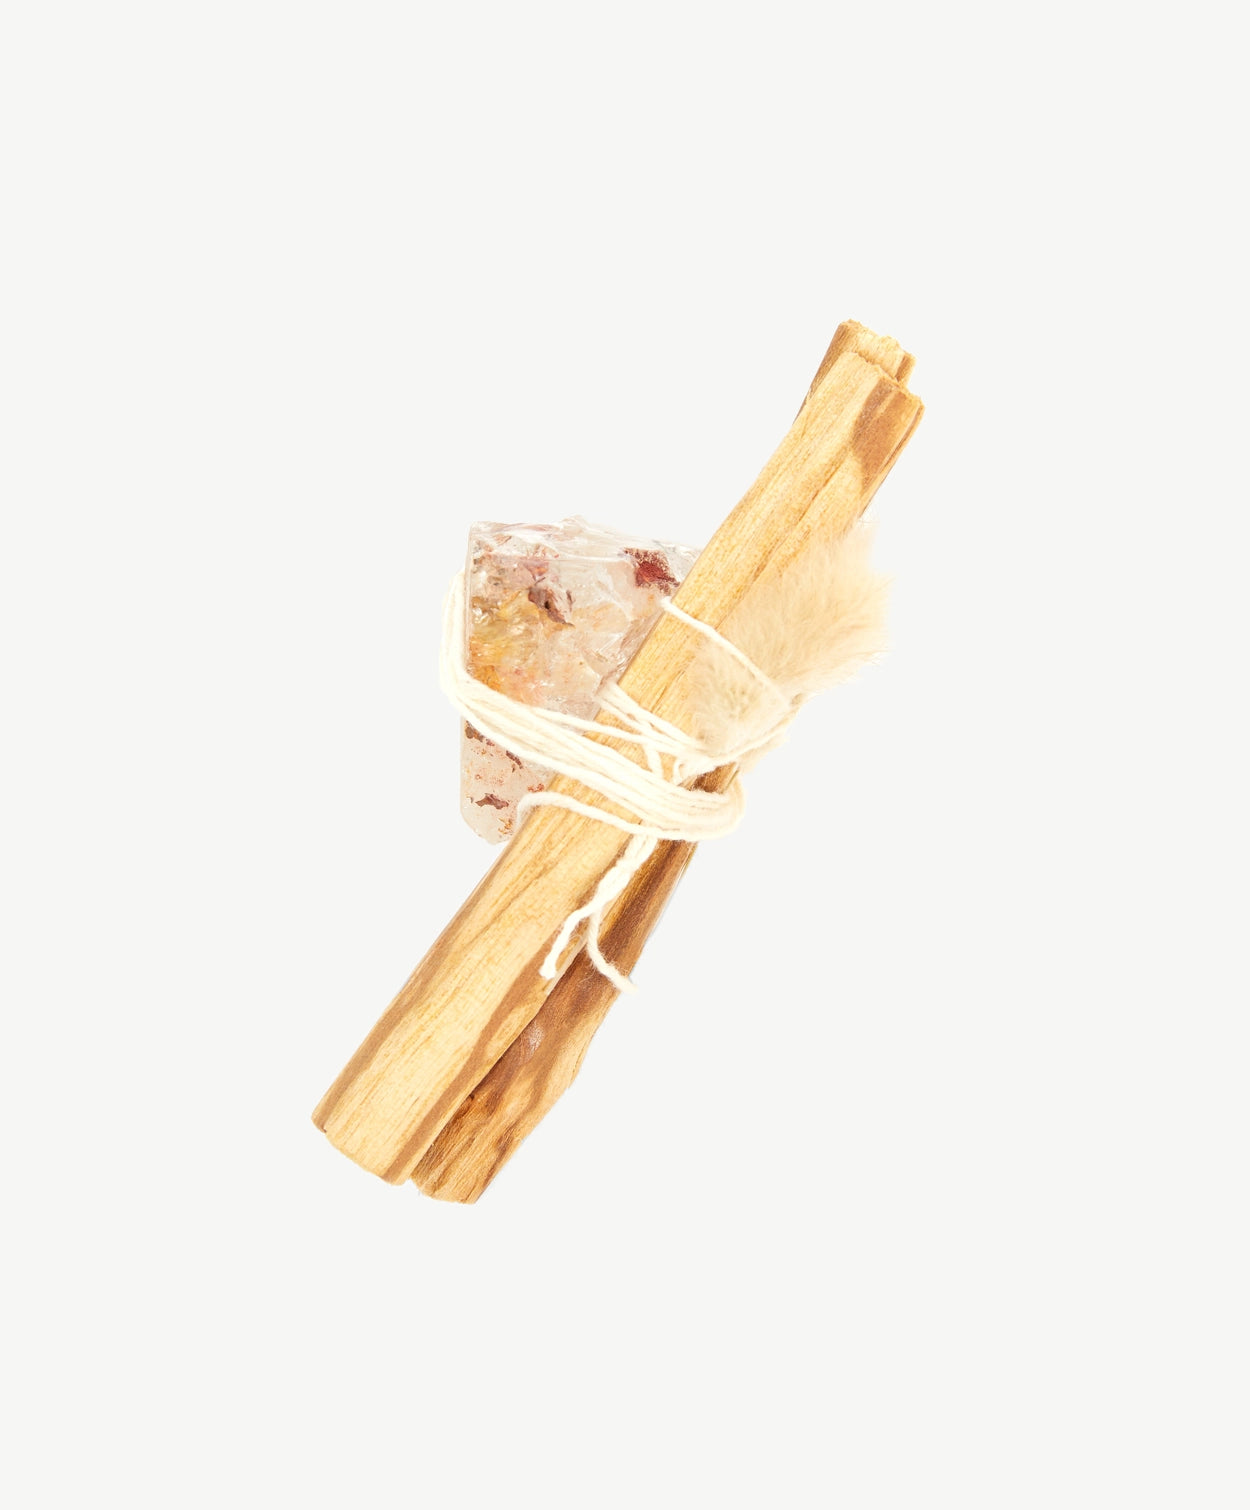 Palo Santo stick bundled to a transparent crystal with white thread string on a white background.